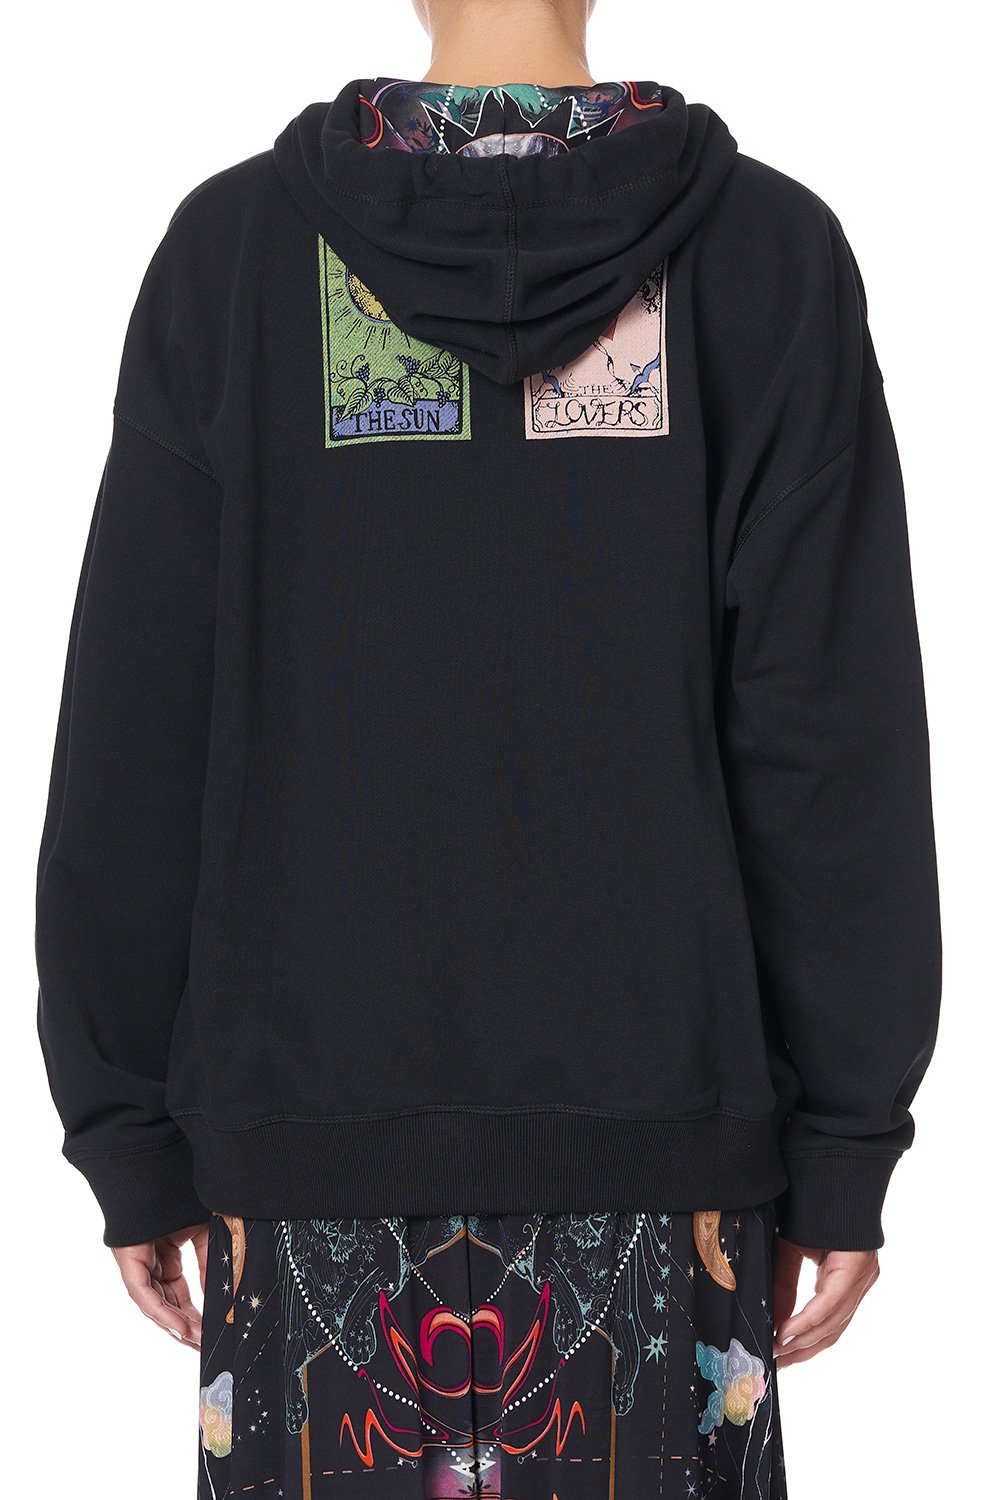 HOODIE WITH SIDE POCKETS MIDNIGHT MOON HOUSE